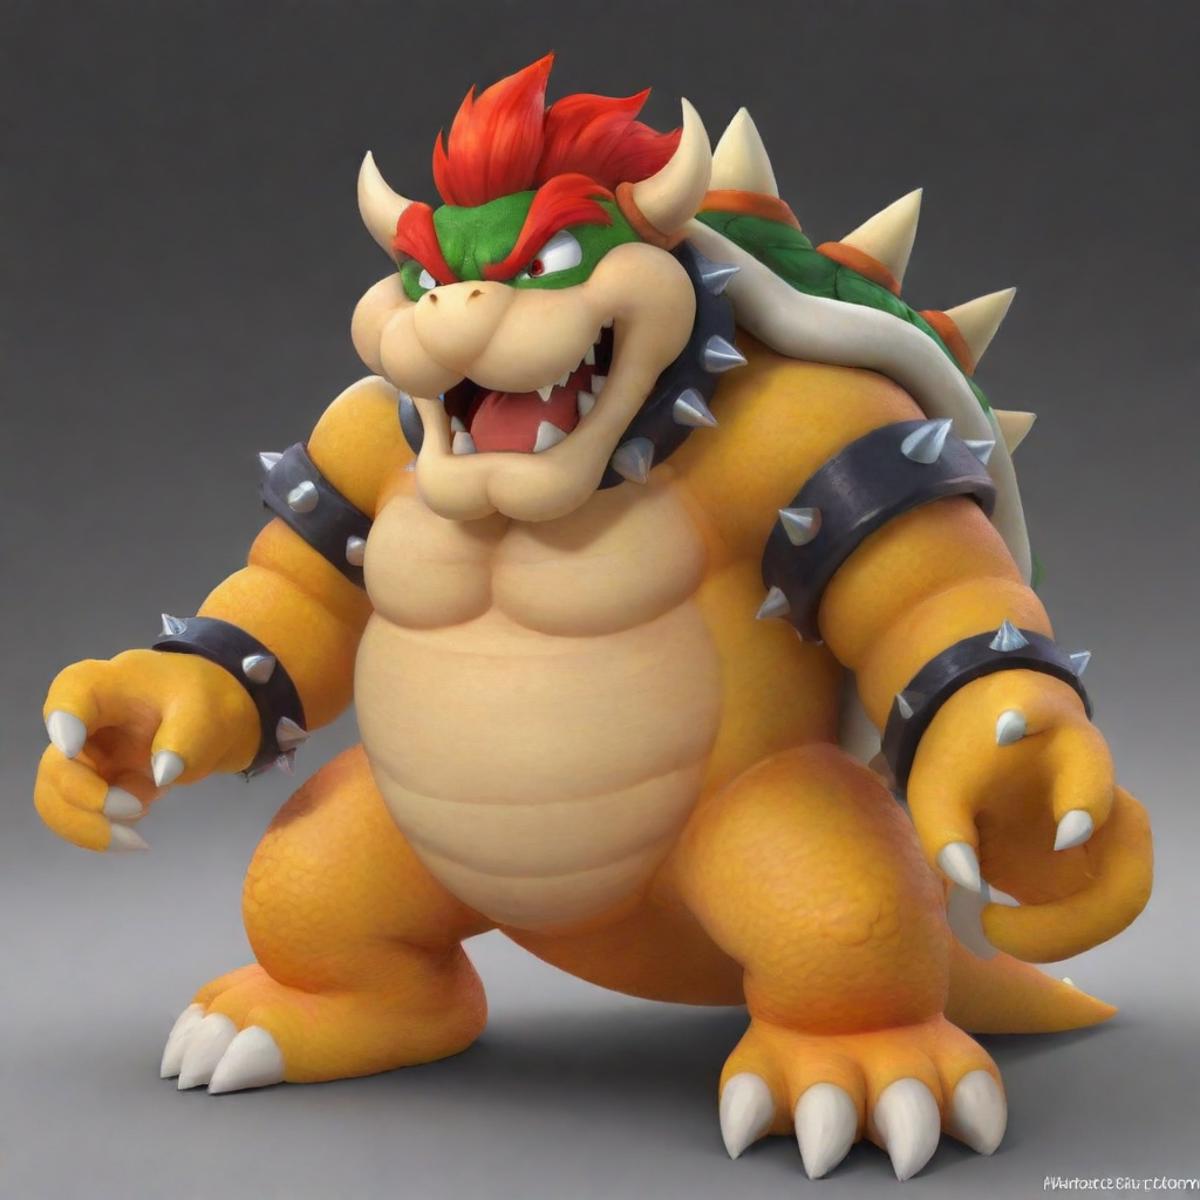 Bowser rework image by TouchNight